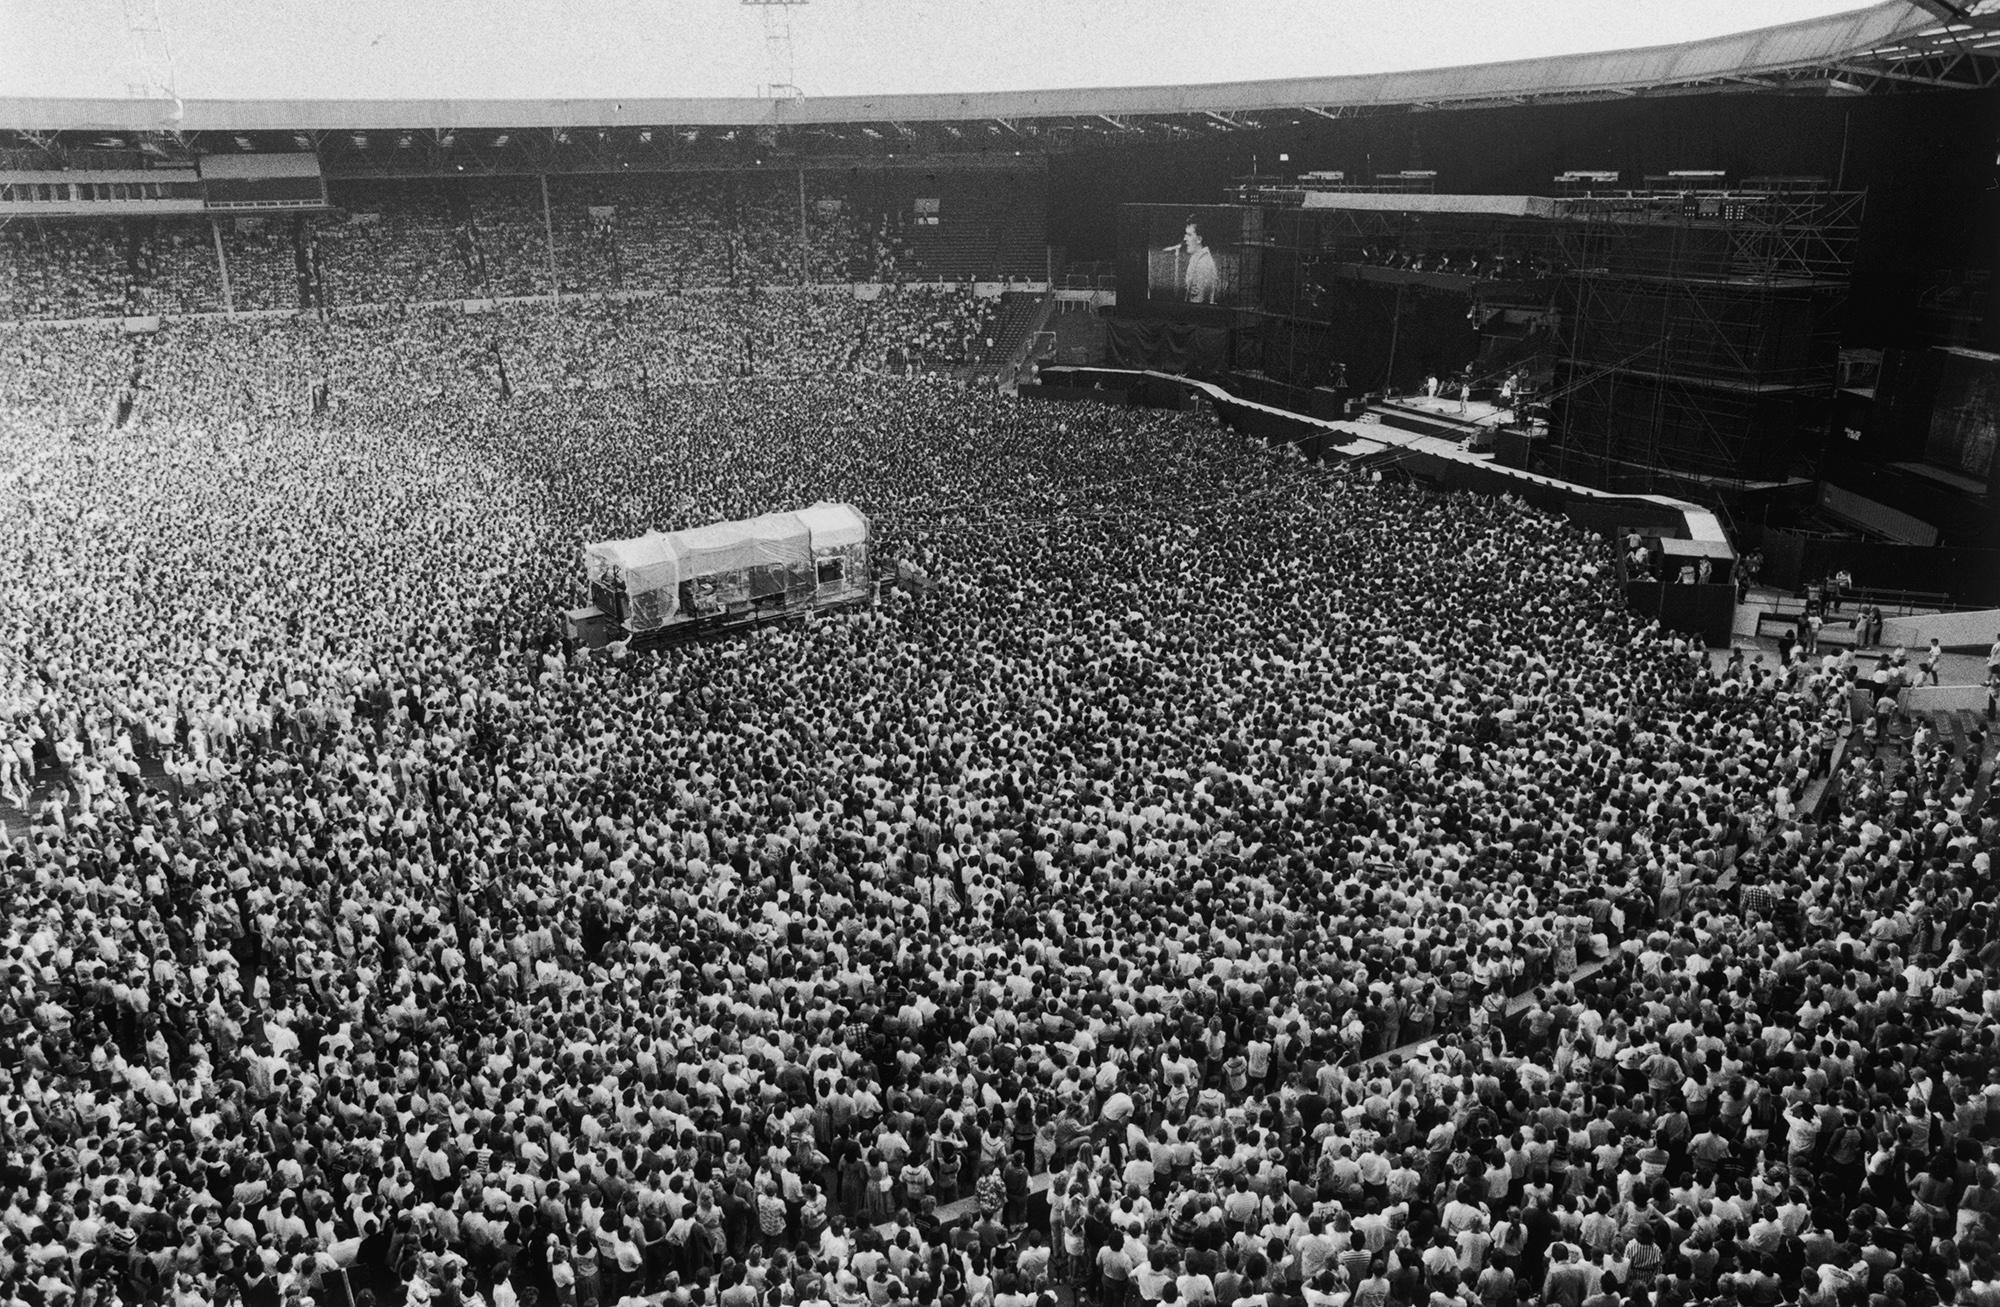 Bruce Springsteen Crowd | Getty Images Gallery